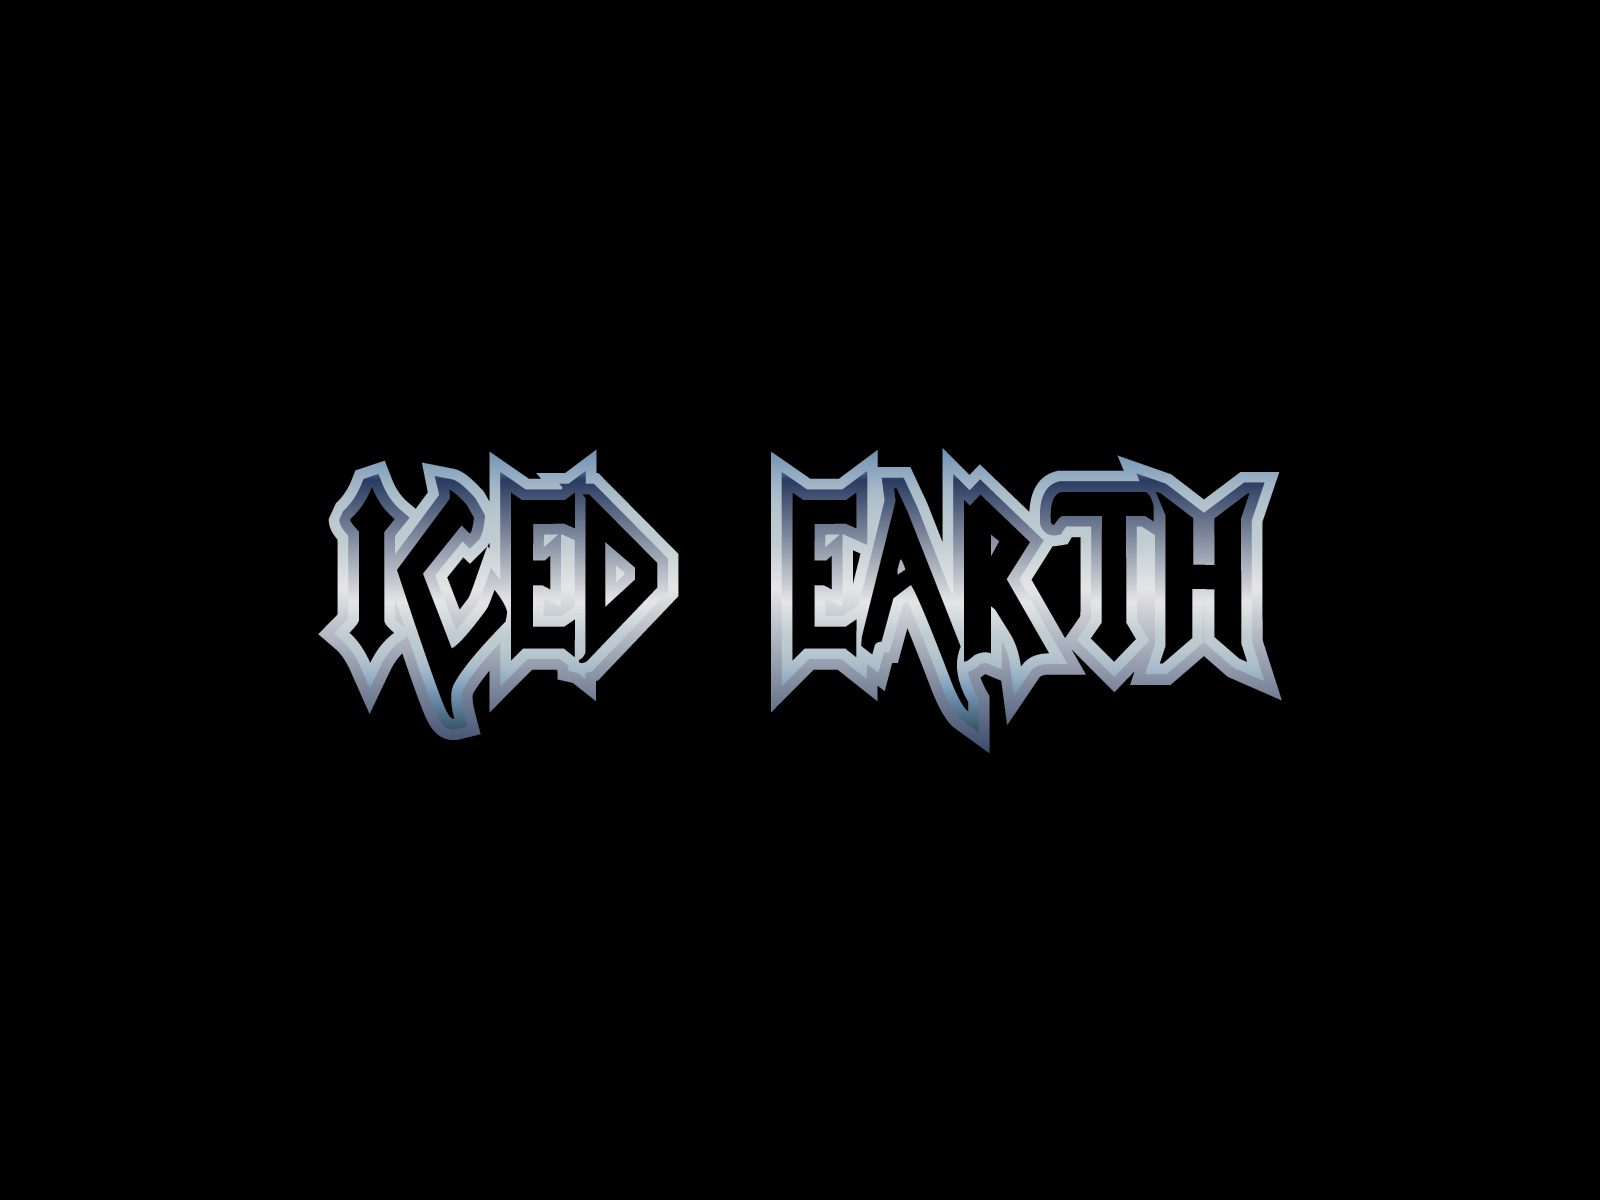 ICED EARTH – New Album “Incorruptible” Out Now!